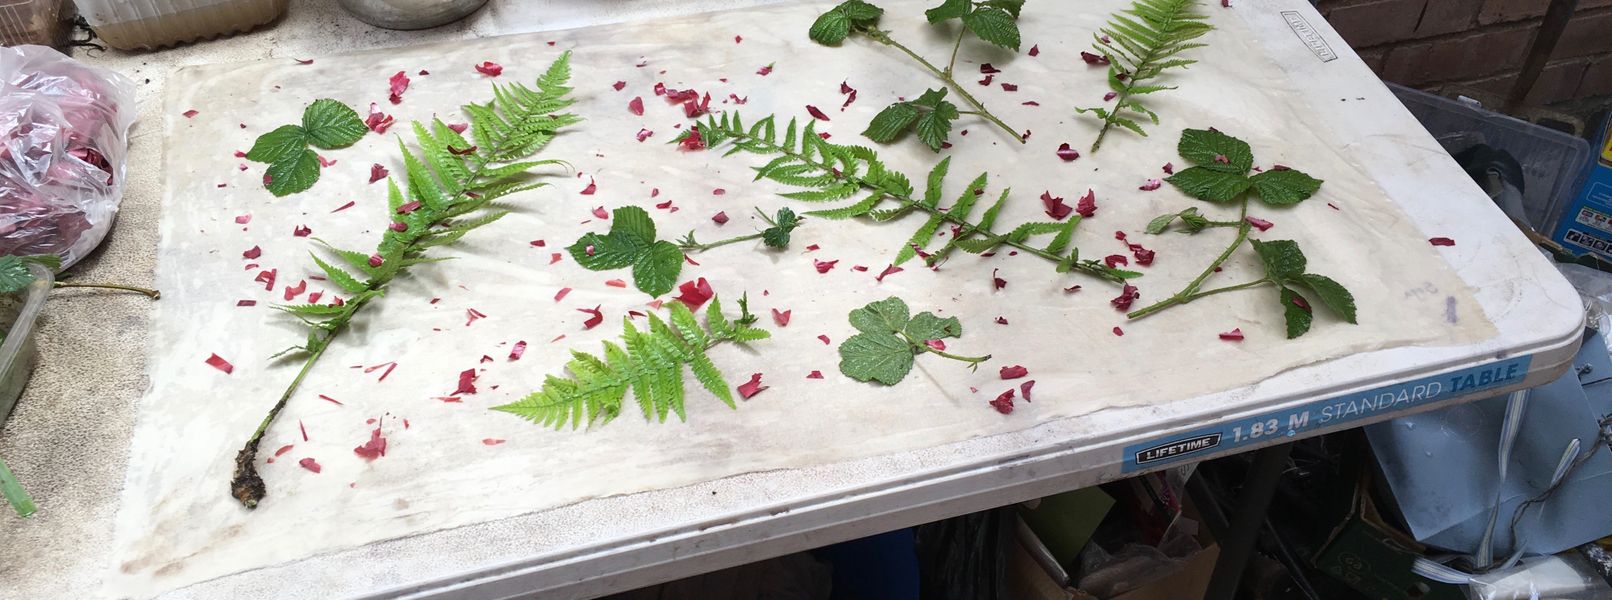 Ecodyeing: Laying out blackberry, fern and red onion leaves.